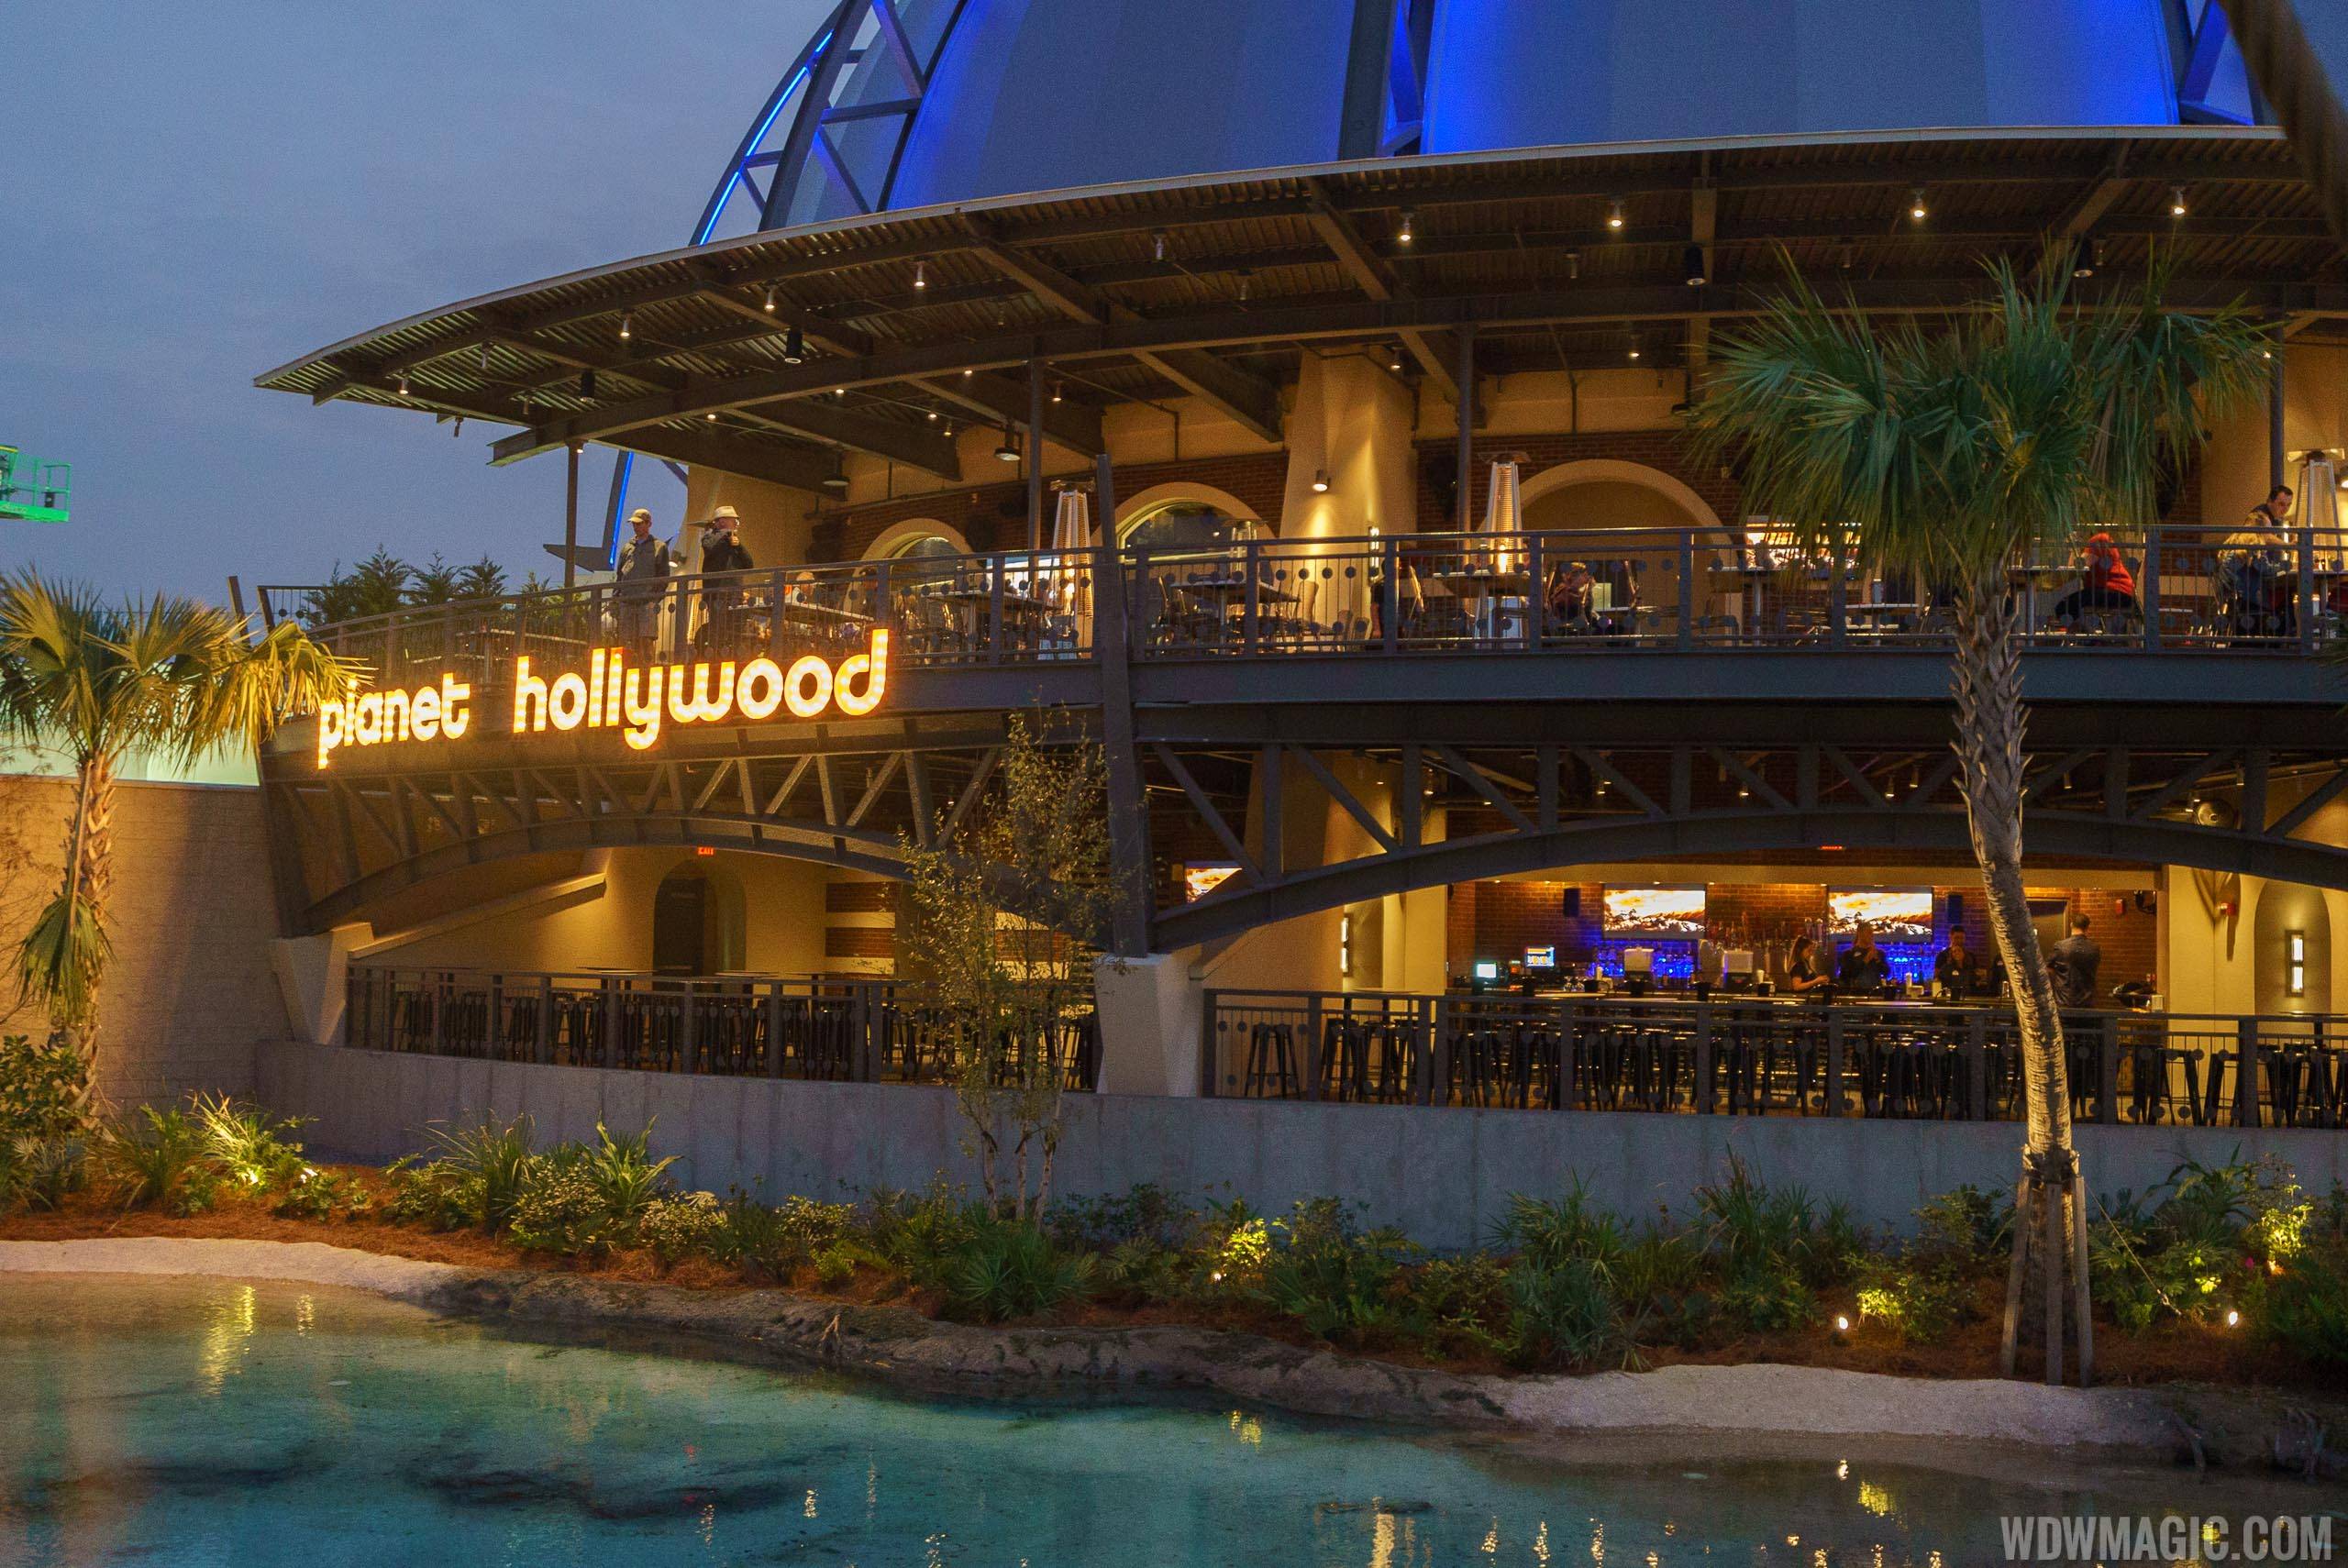 Planet Hollywood Observatory - Stargazers Lounge and Outdoor dining